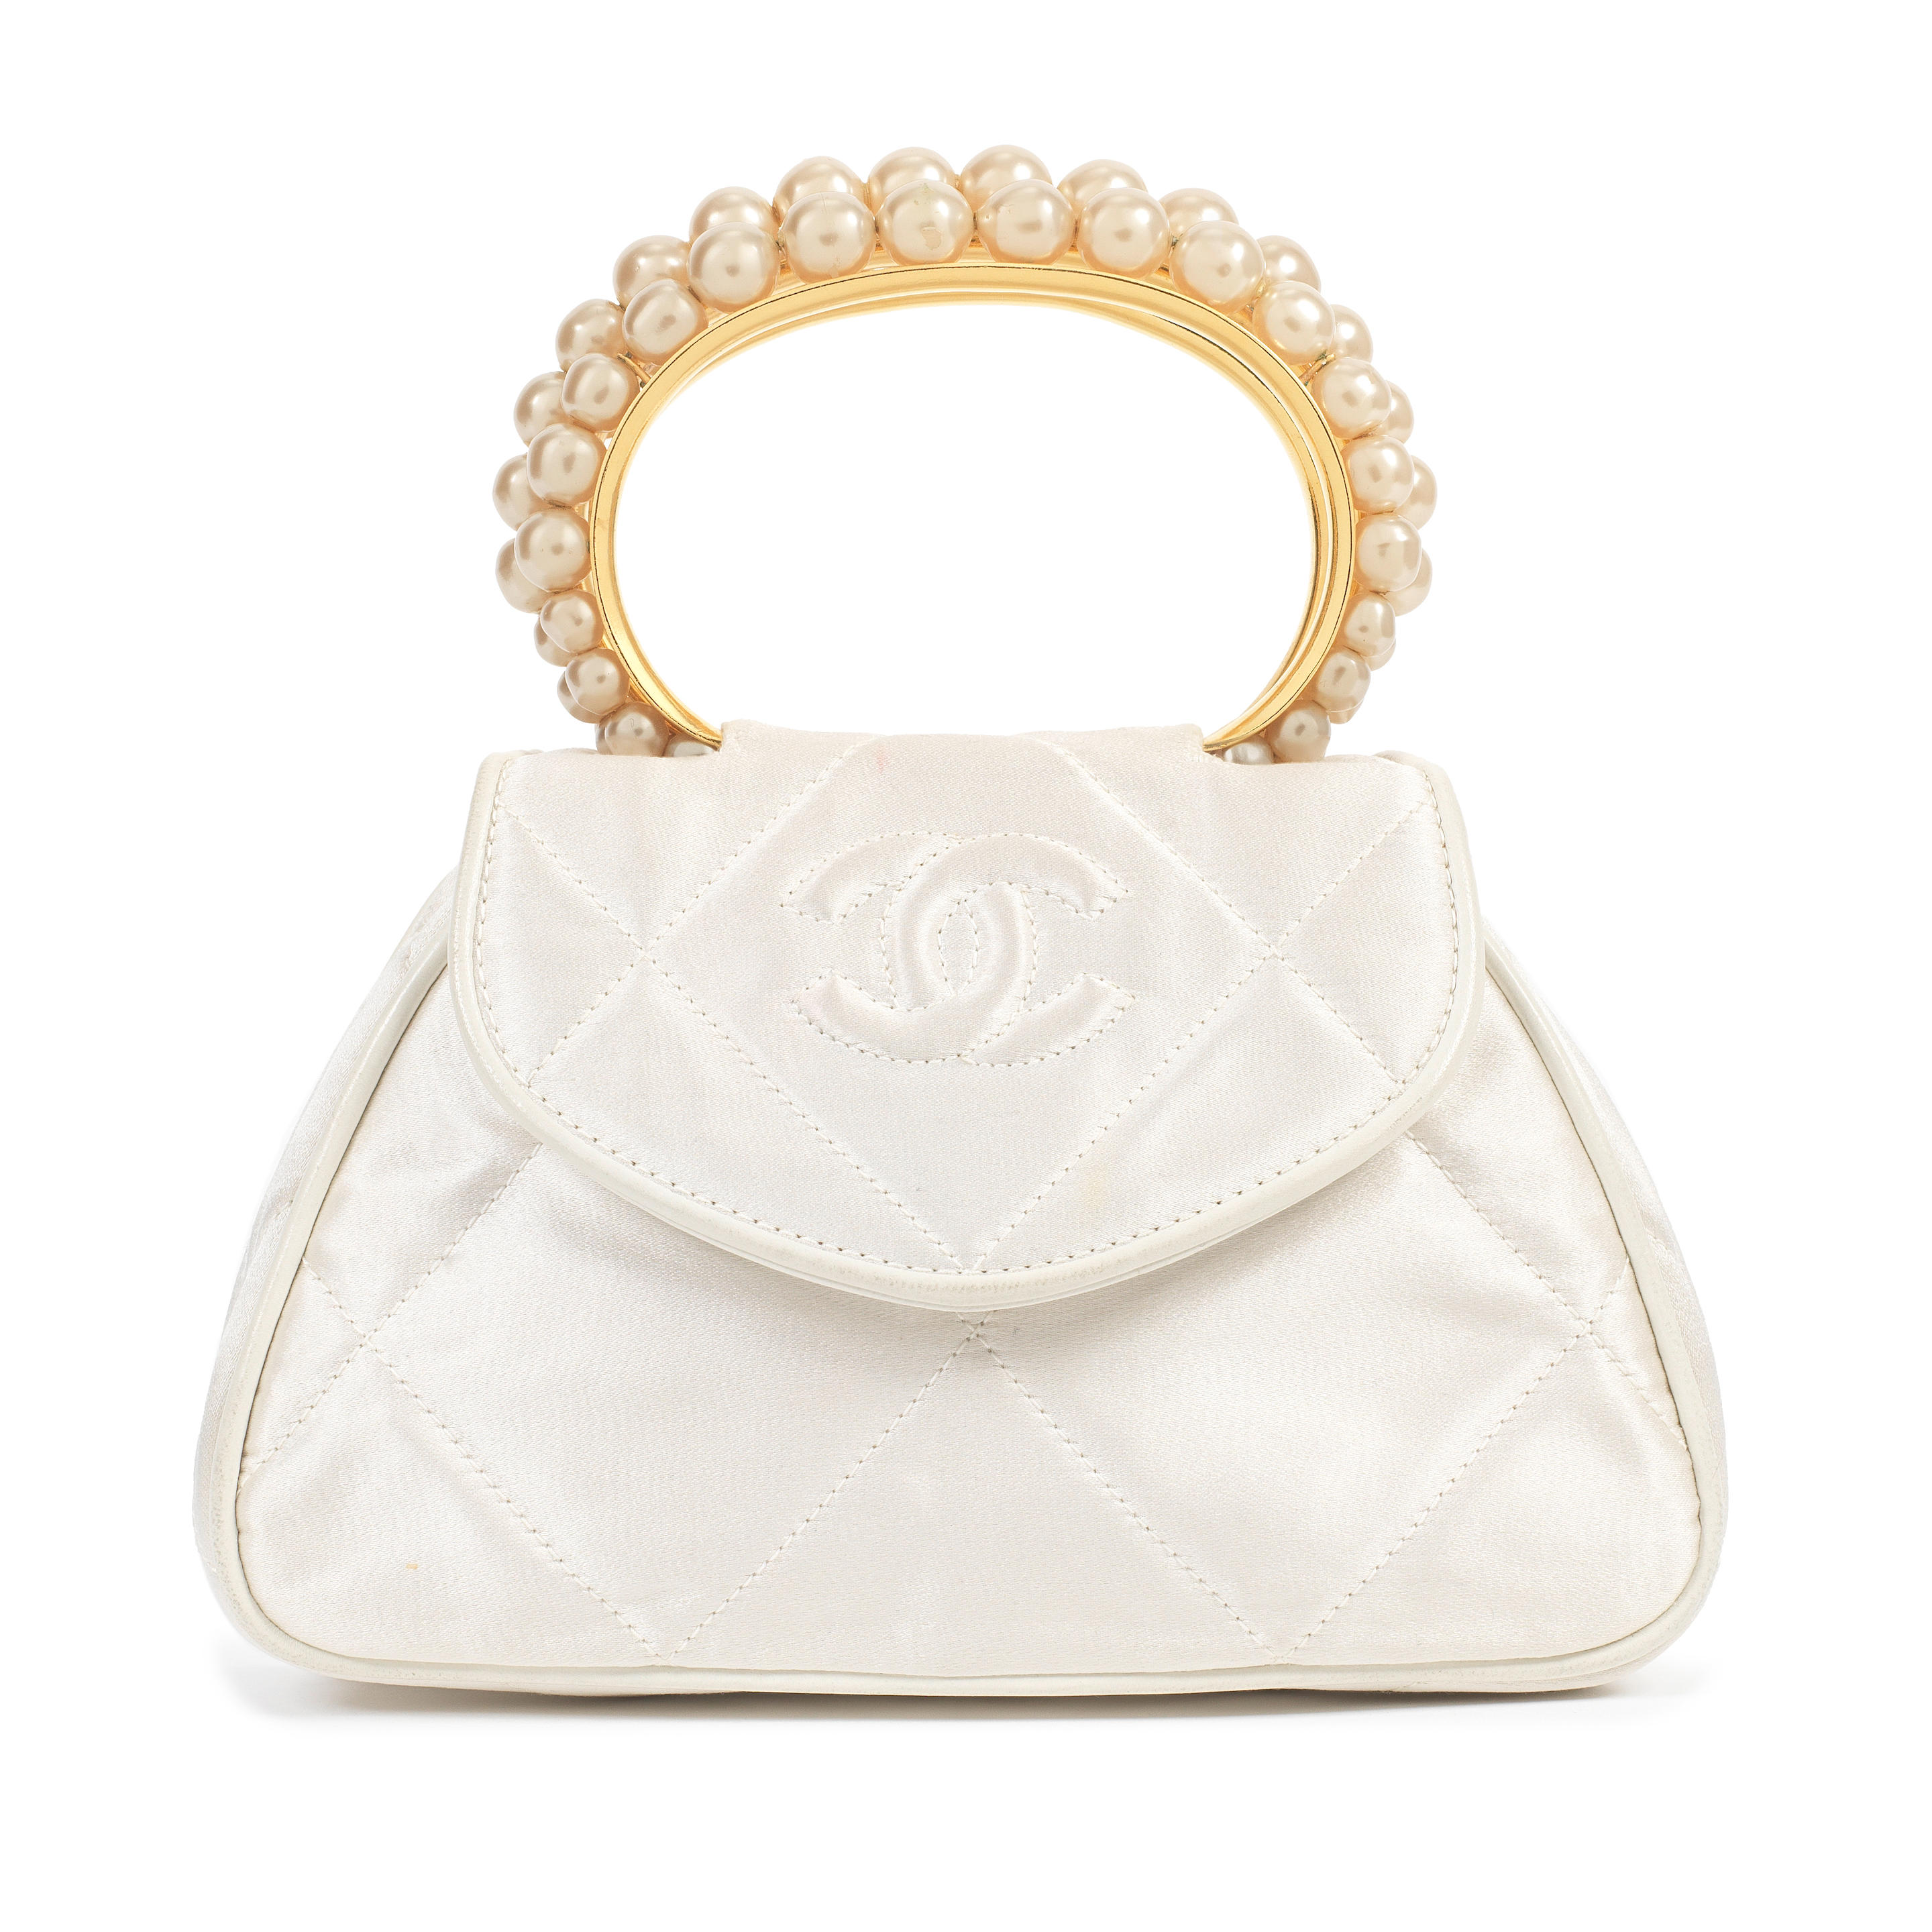 Karl Lagerfeld for Chanel a White Satin and Simulated Pearl Top Handle Mini  Flap Bag 1989-91 (includes serial sticker, authenticity card and dust bag)  - Bonhams